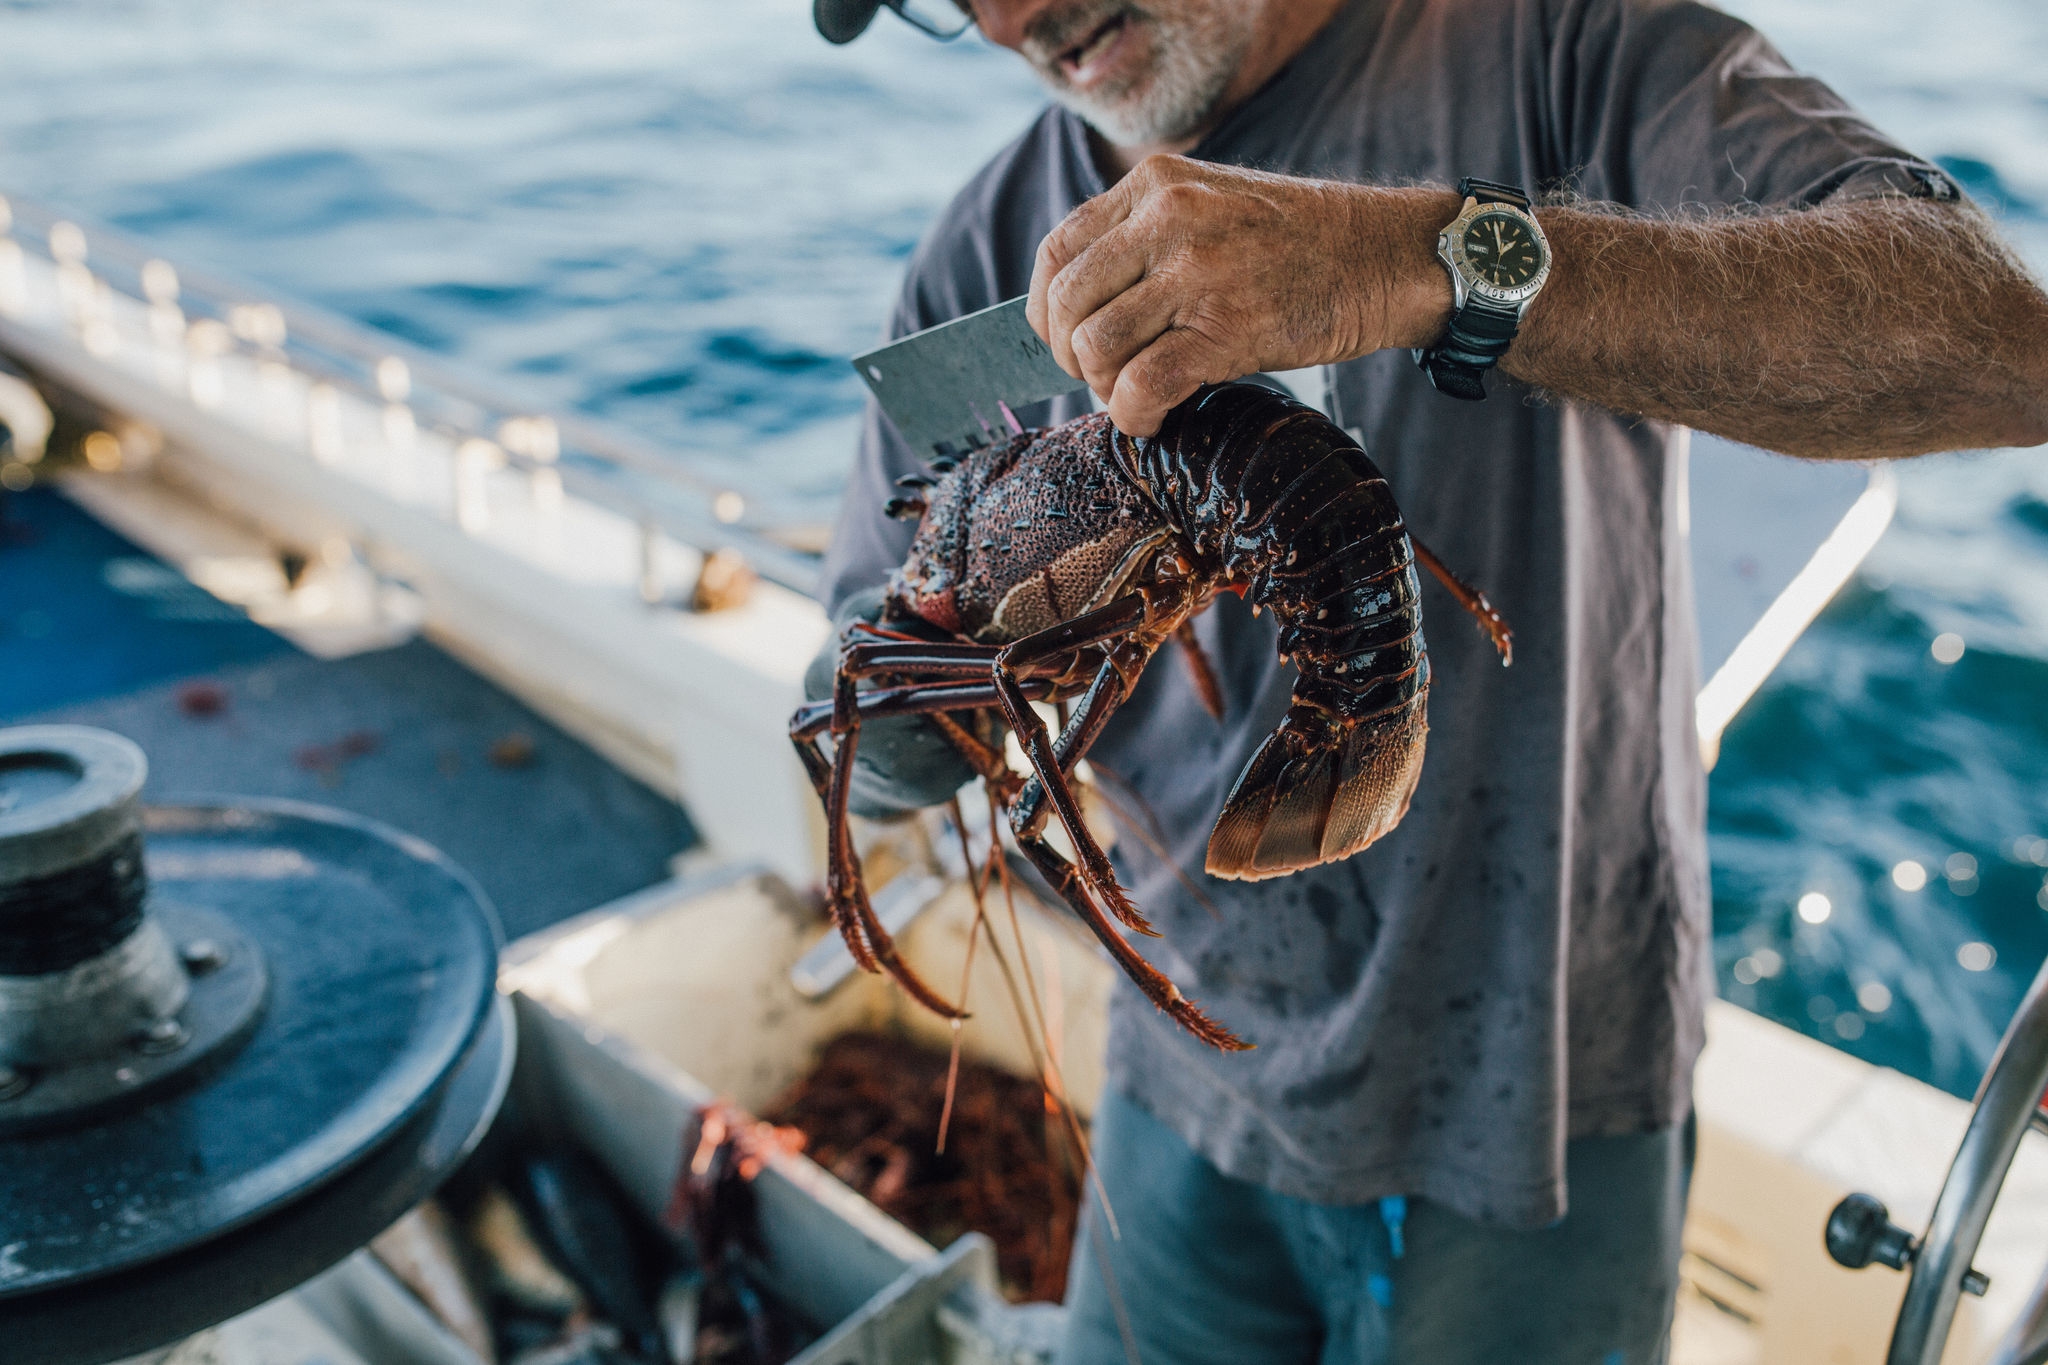 A man on a boat holding a rock lobster and measuring it with a steel ruler.